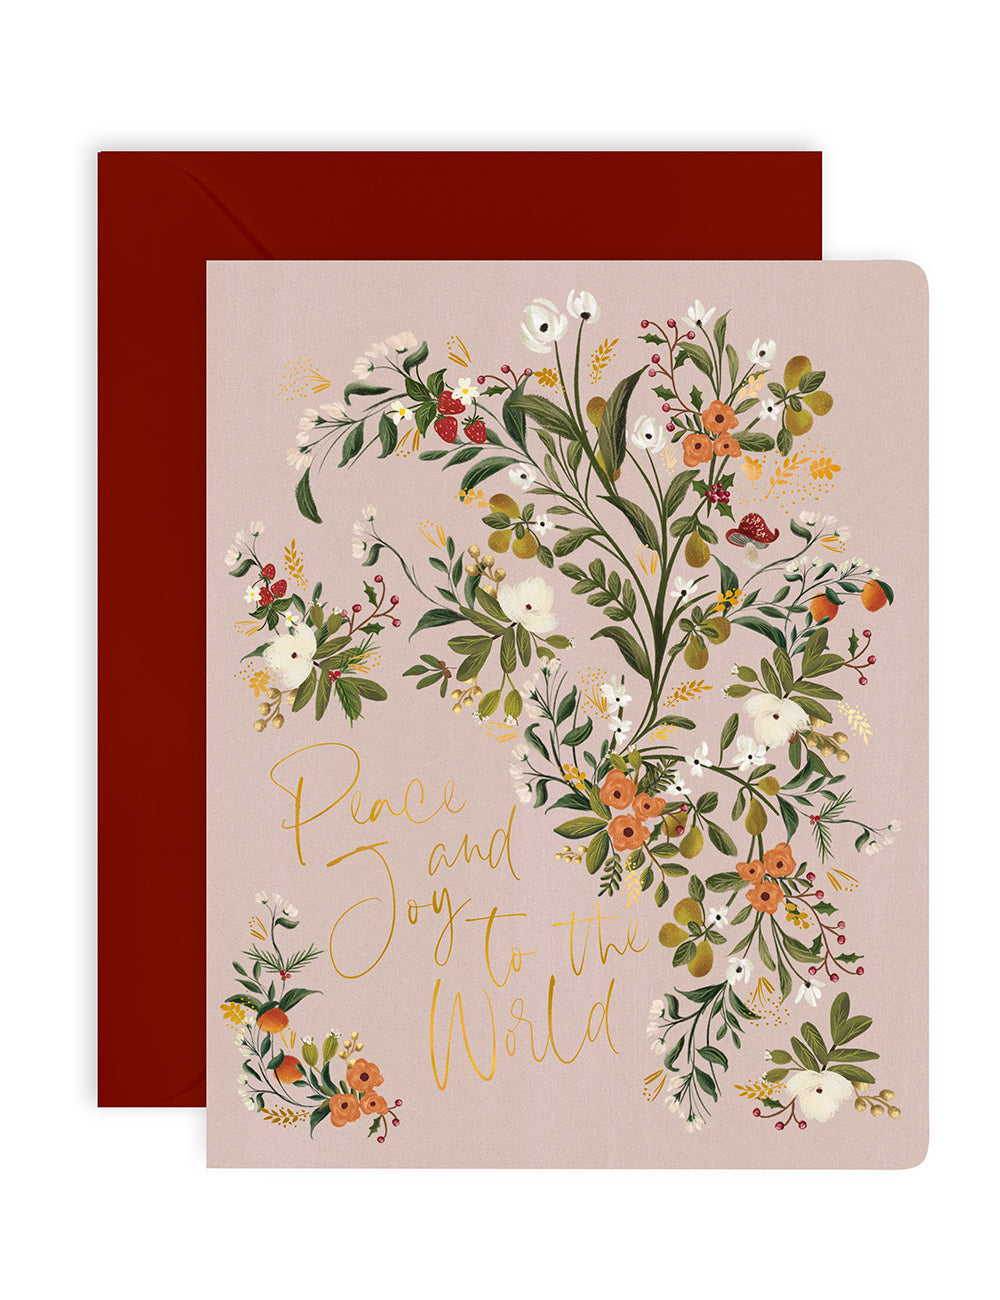 Greeting Card | Peace and Joy to the World